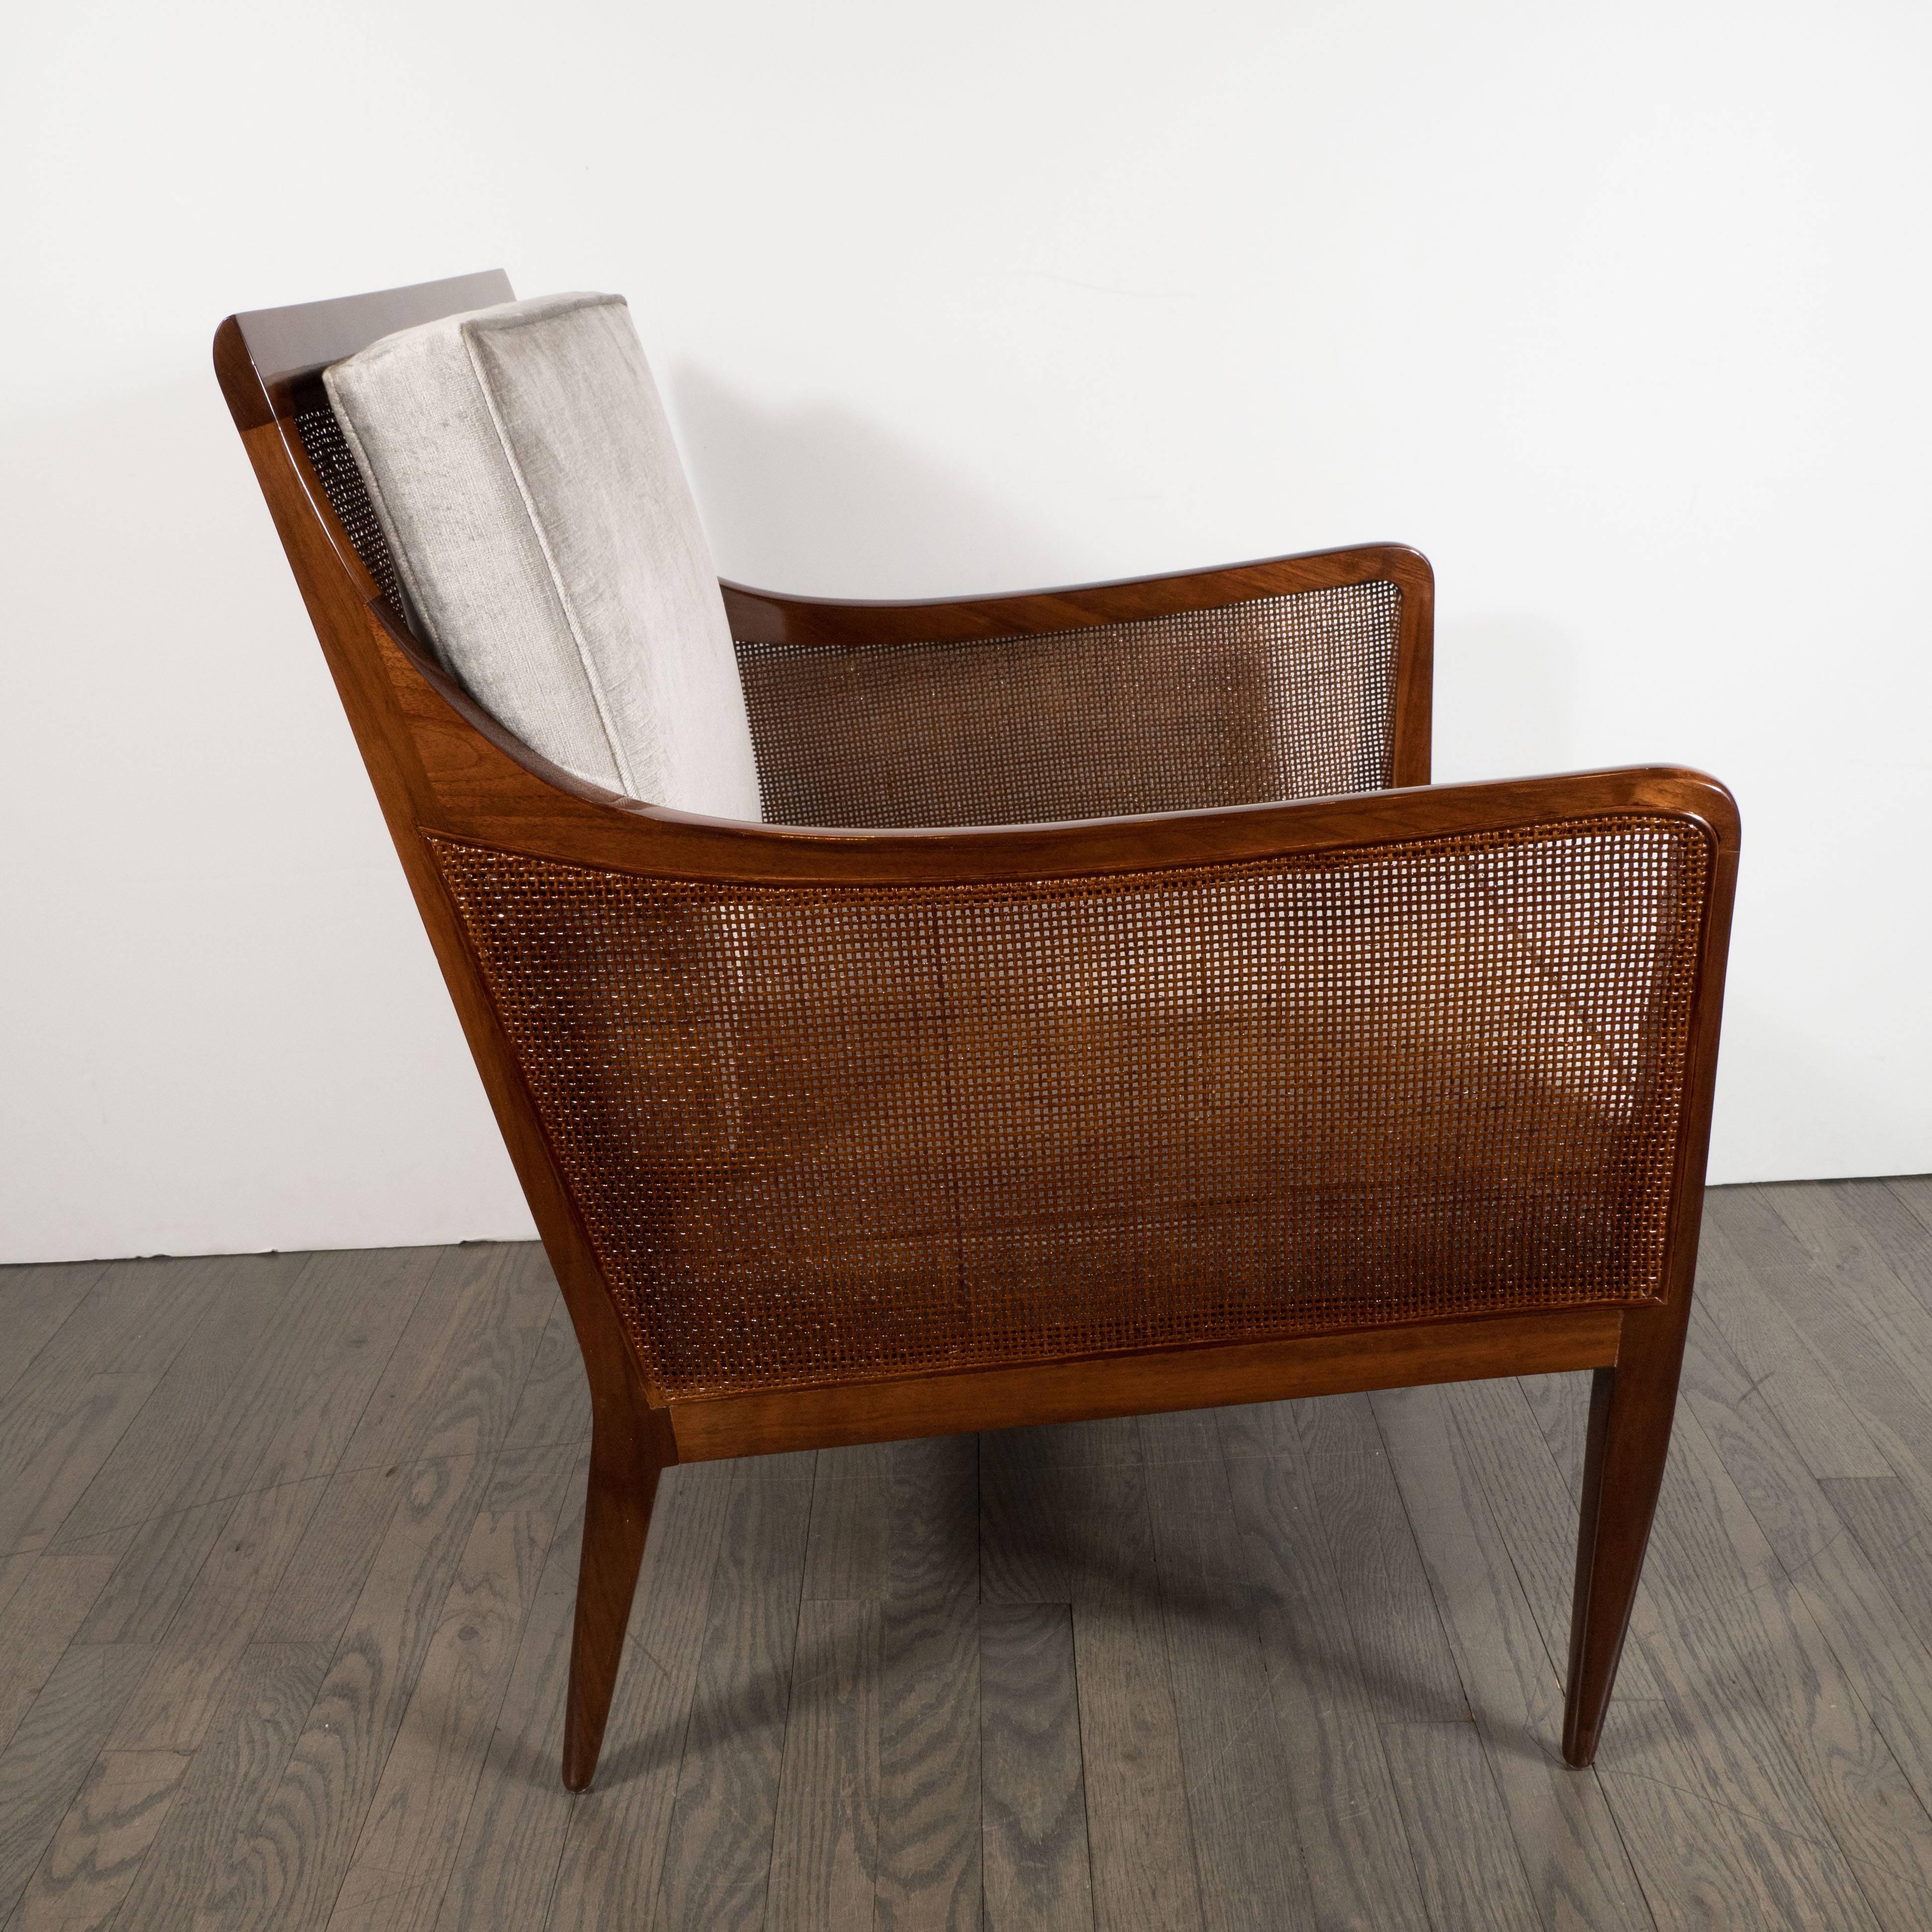 American Mid-Century Modern Walnut and Cane Club Chair in Smoked Platinum Velvet